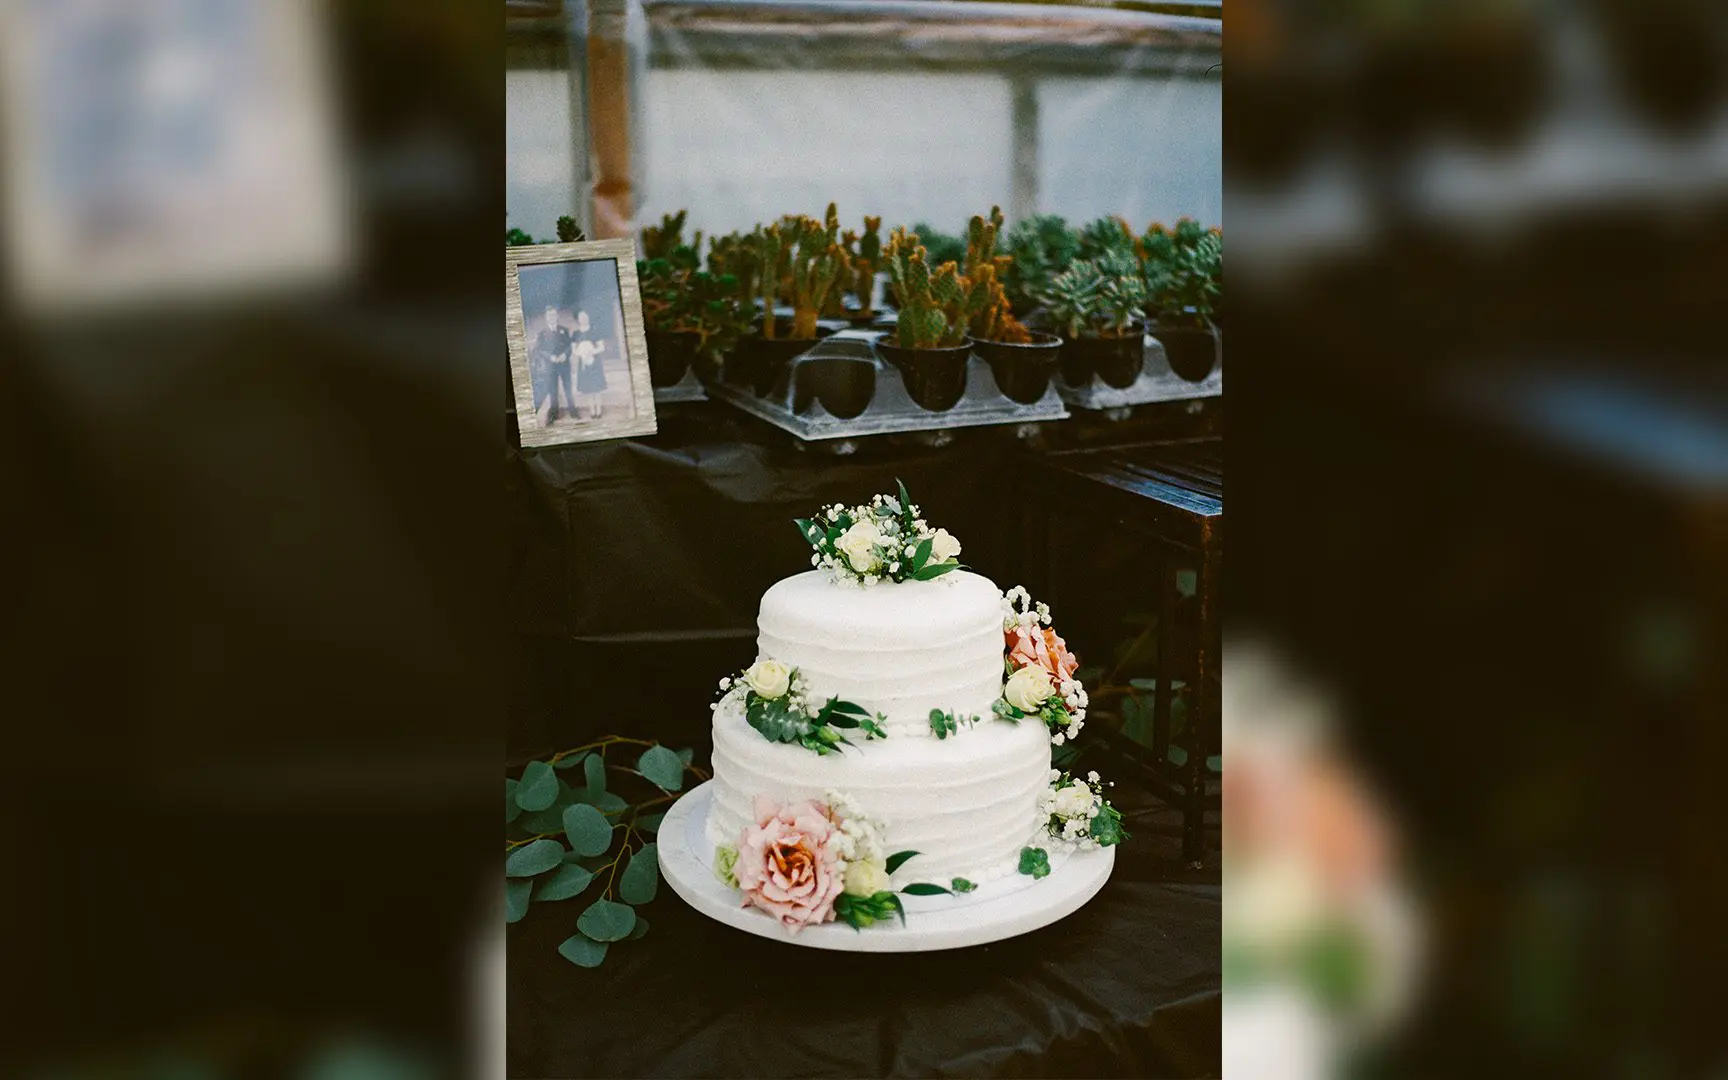 Three-tiered white wedding cake decorated with pink and white flowers, displayed on a table surrounded by flowering plants in a greenhouse.